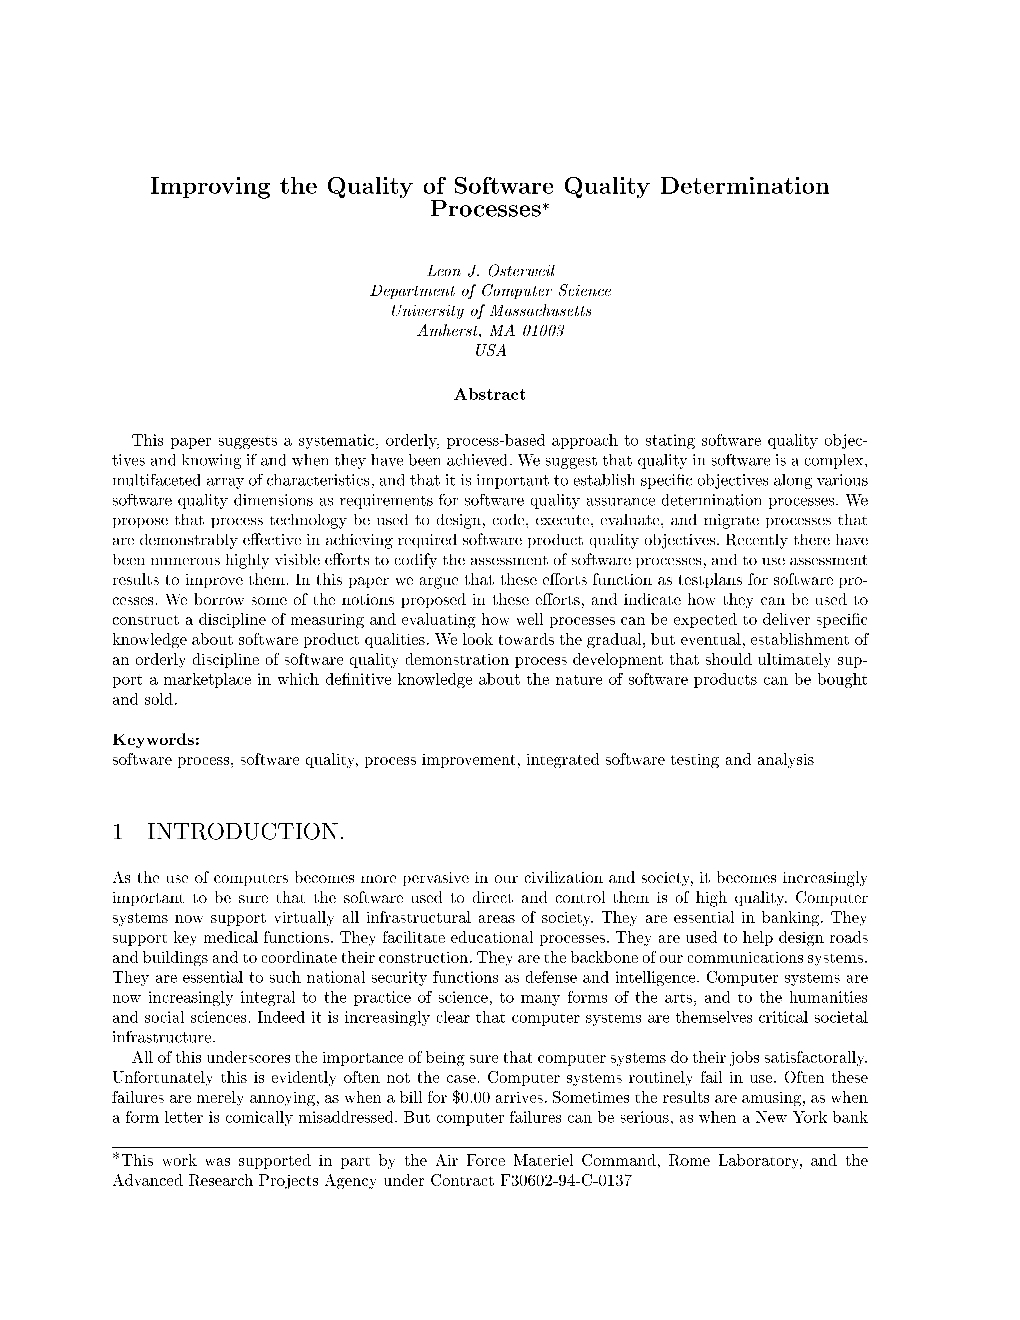 Improving the Quality of Software Quality Determination Processes*